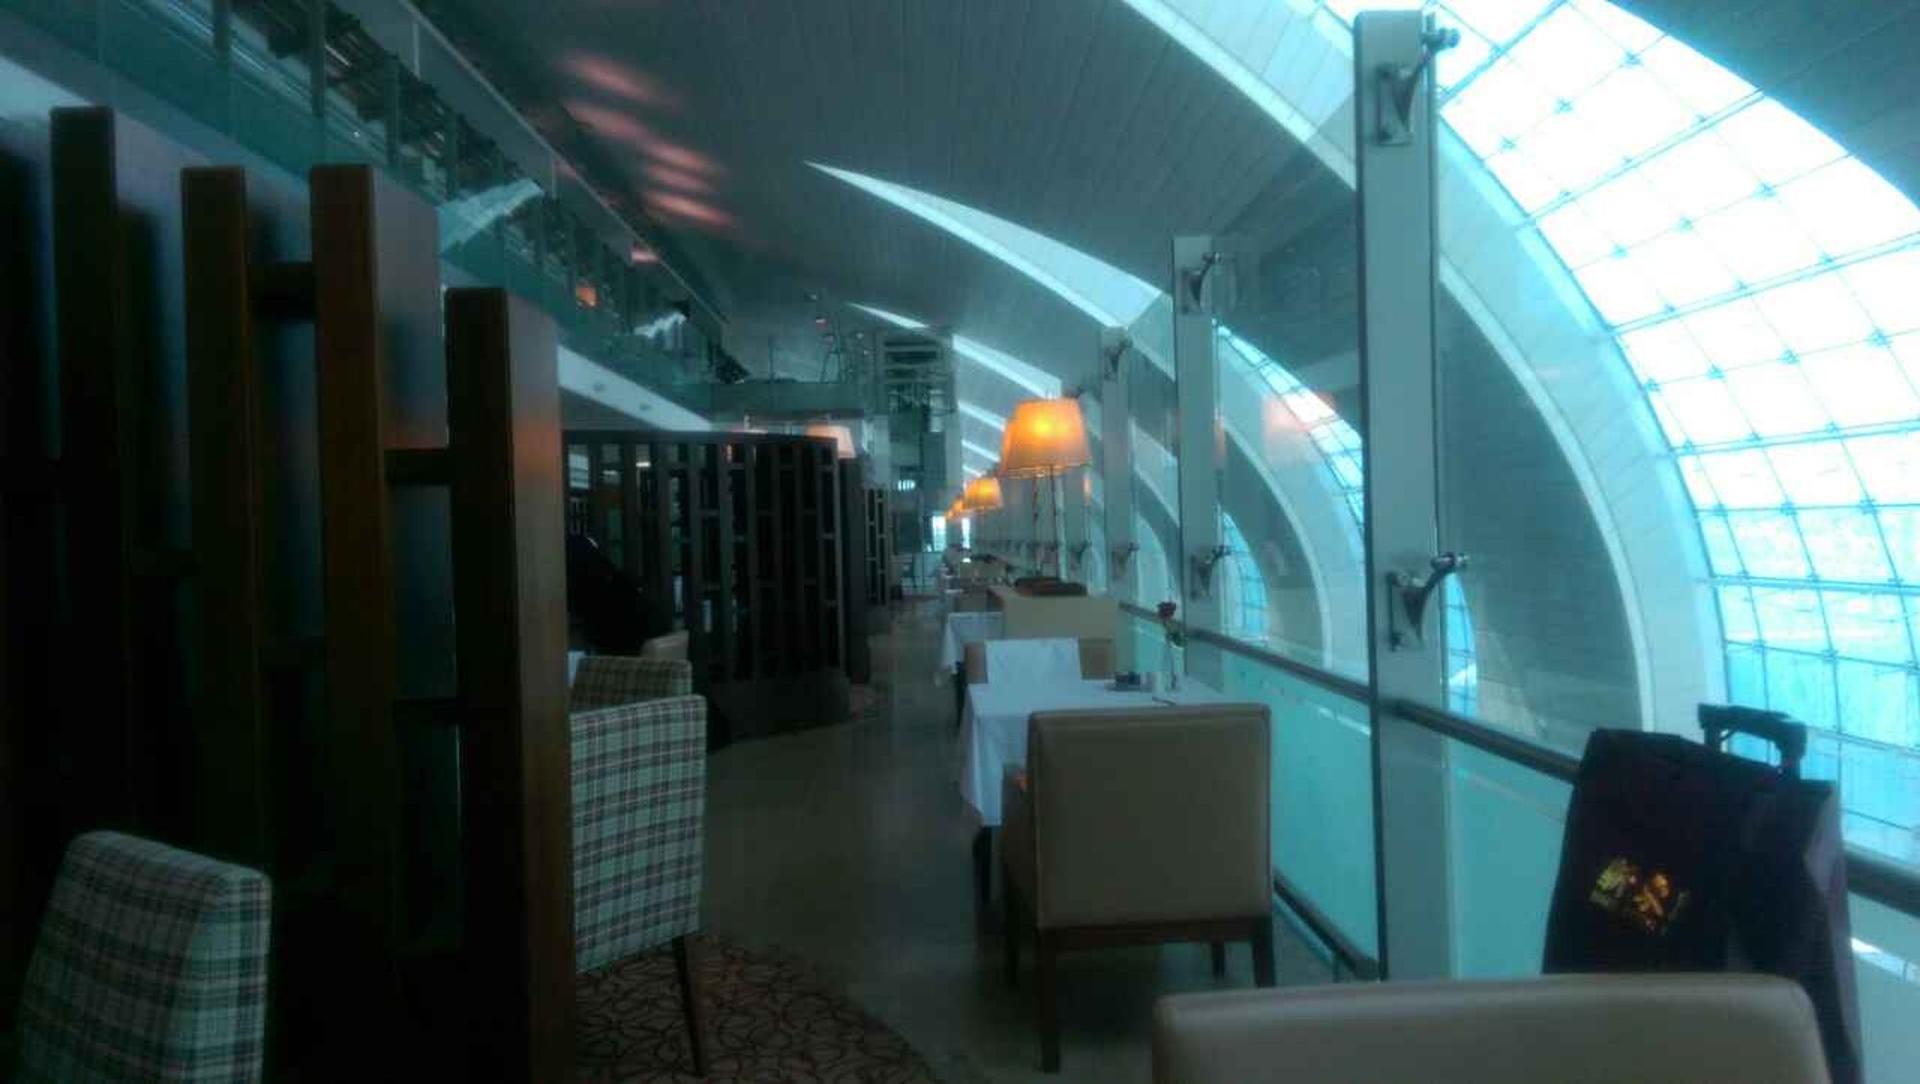 Emirates First Class Lounge image 13 of 21